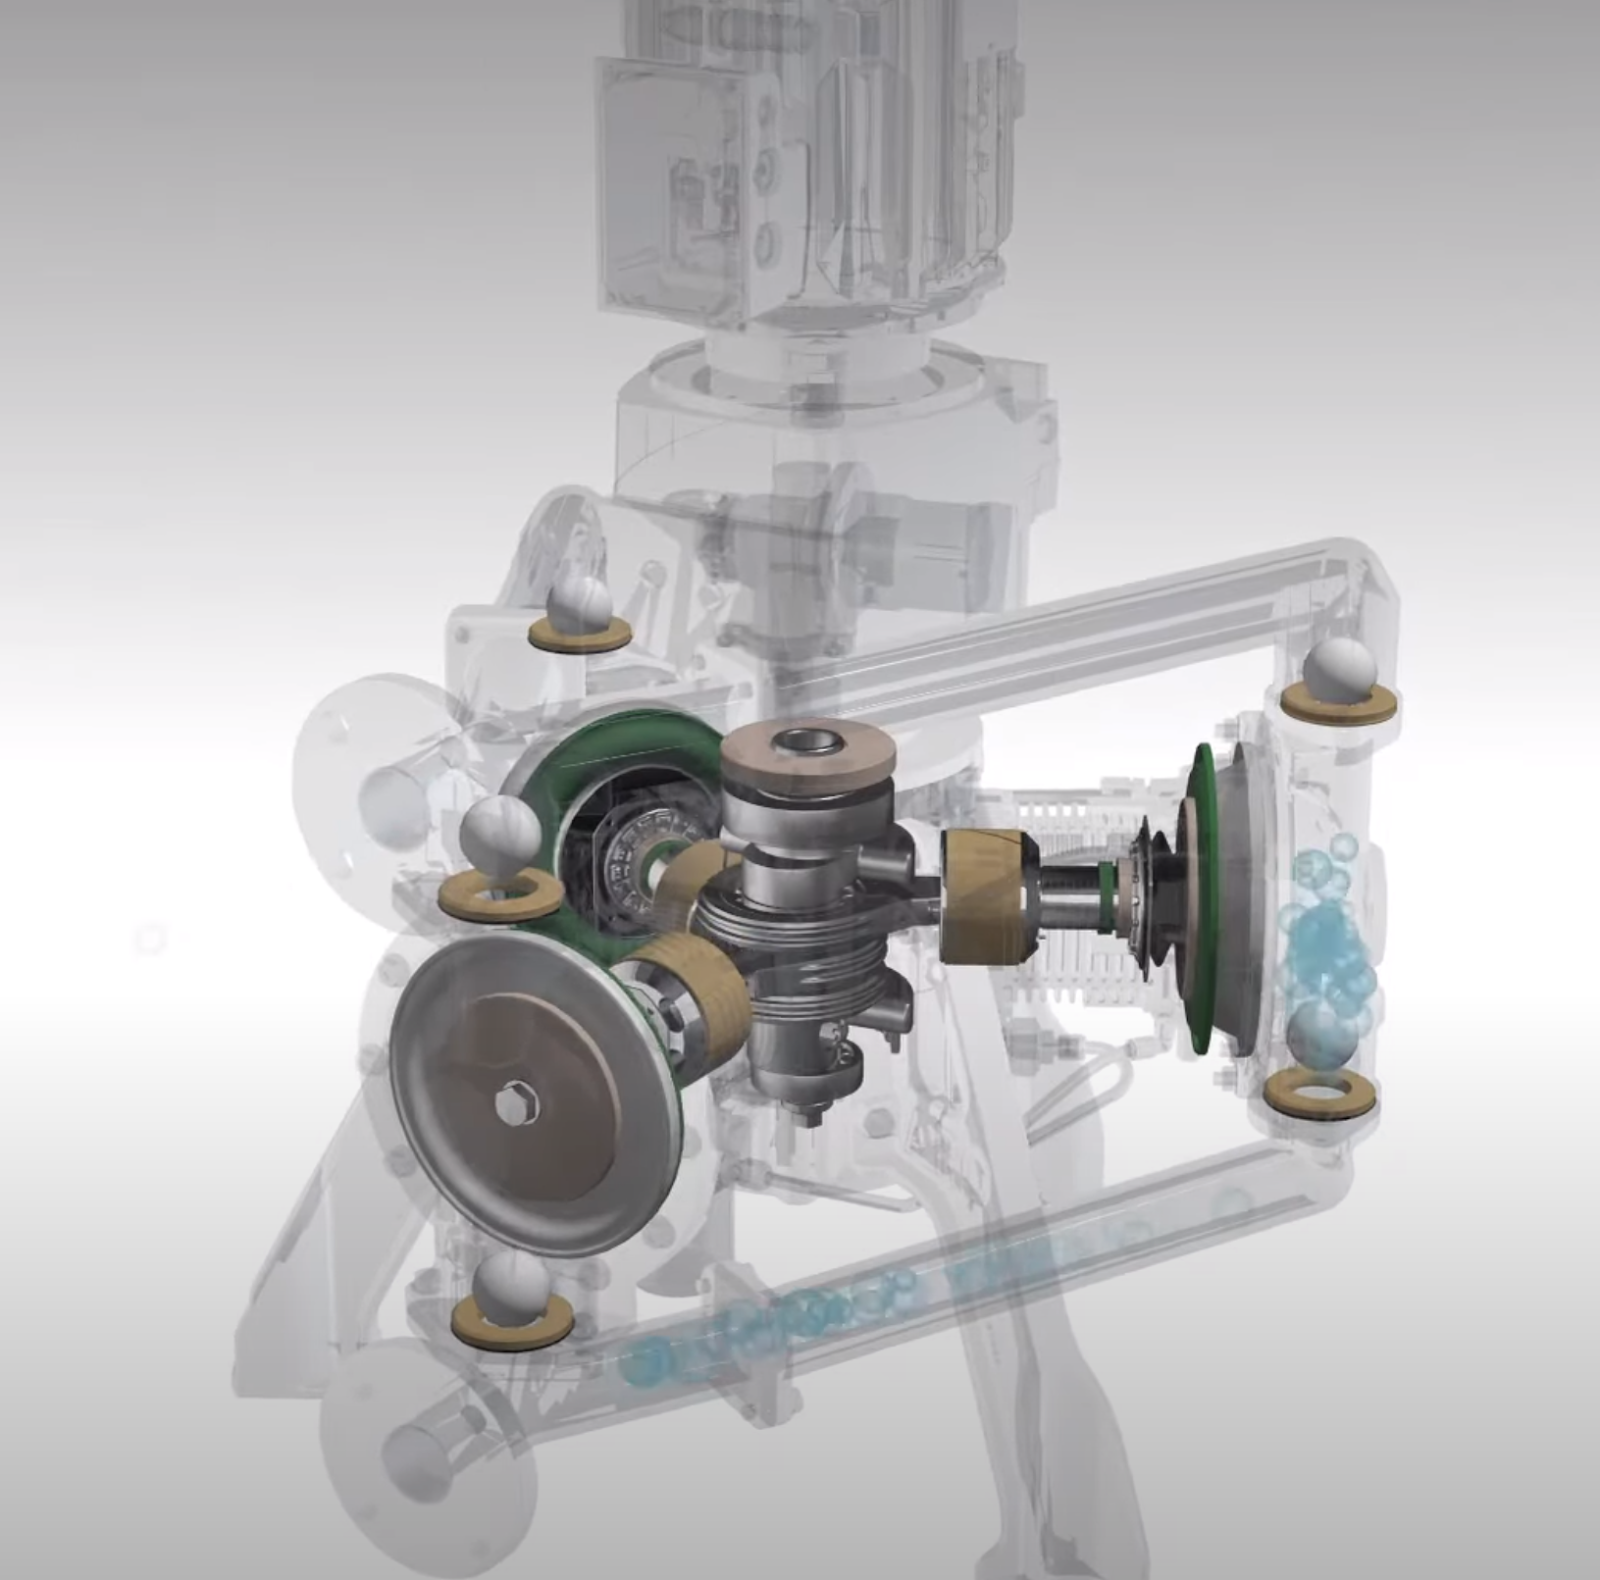 how does work an electric diaphragm pump